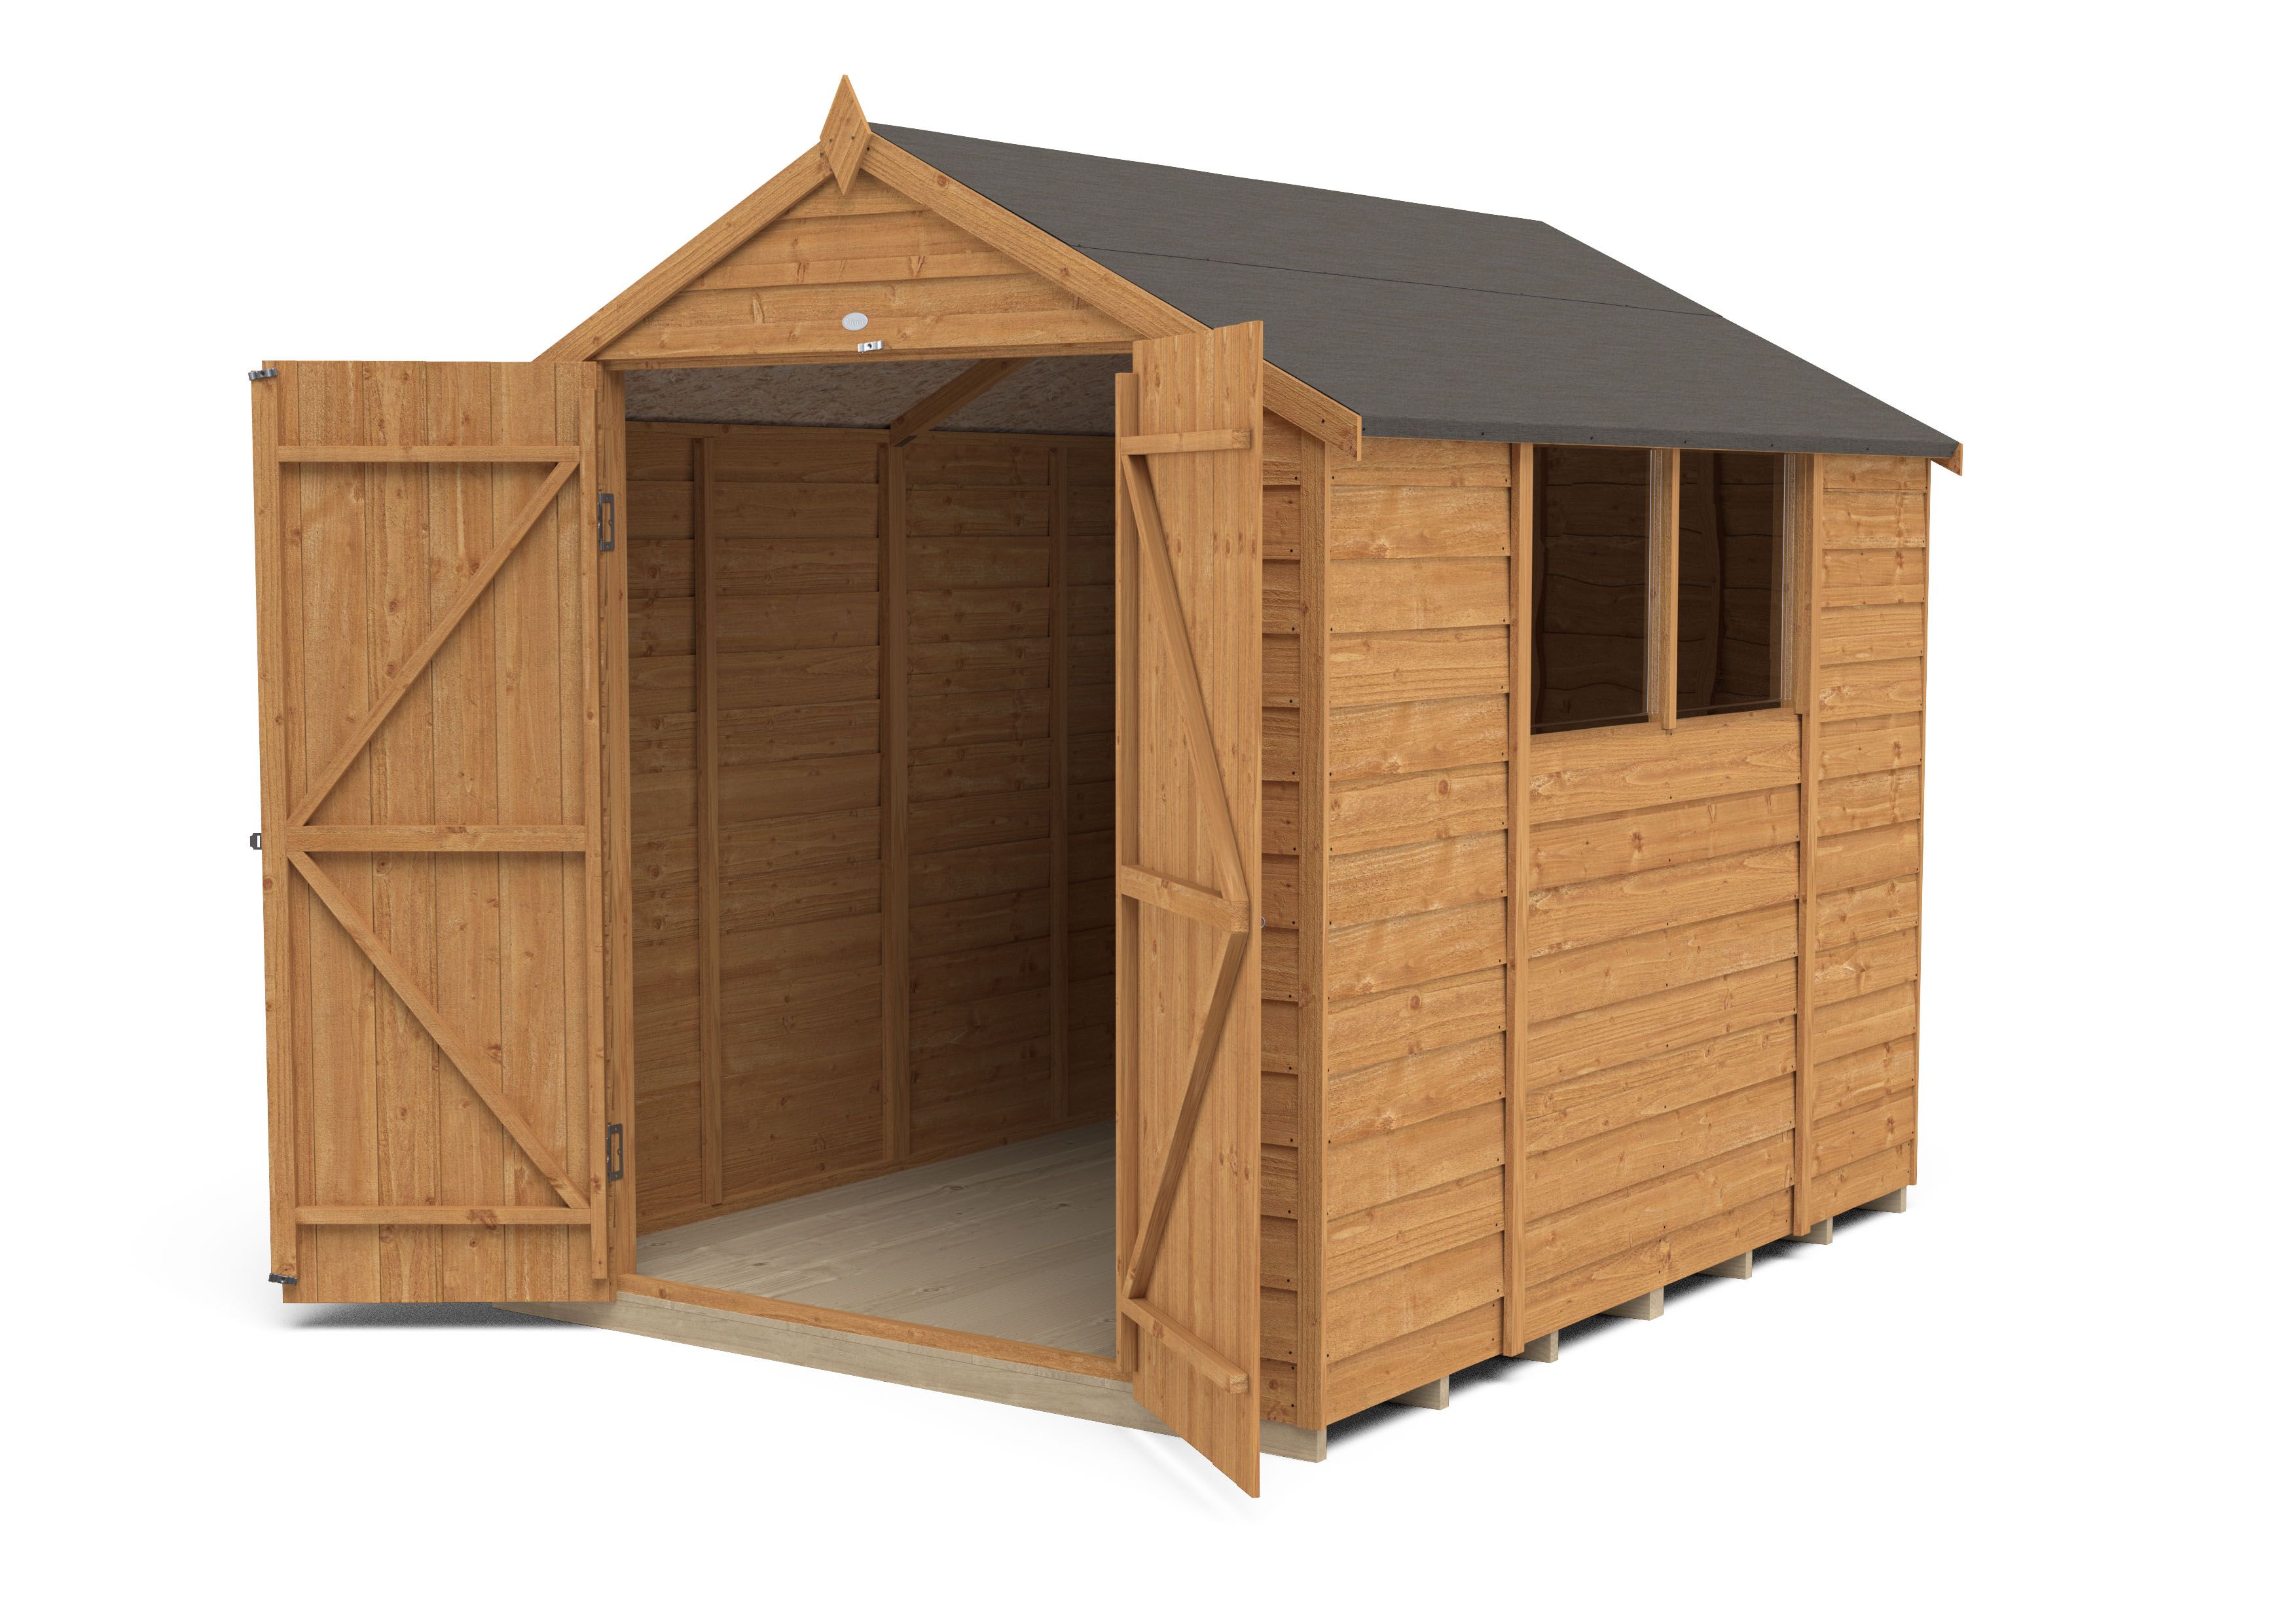 Forest Garden 8x6 ft Apex Wooden 2 door Shed with floor & 2 windows (Base included)